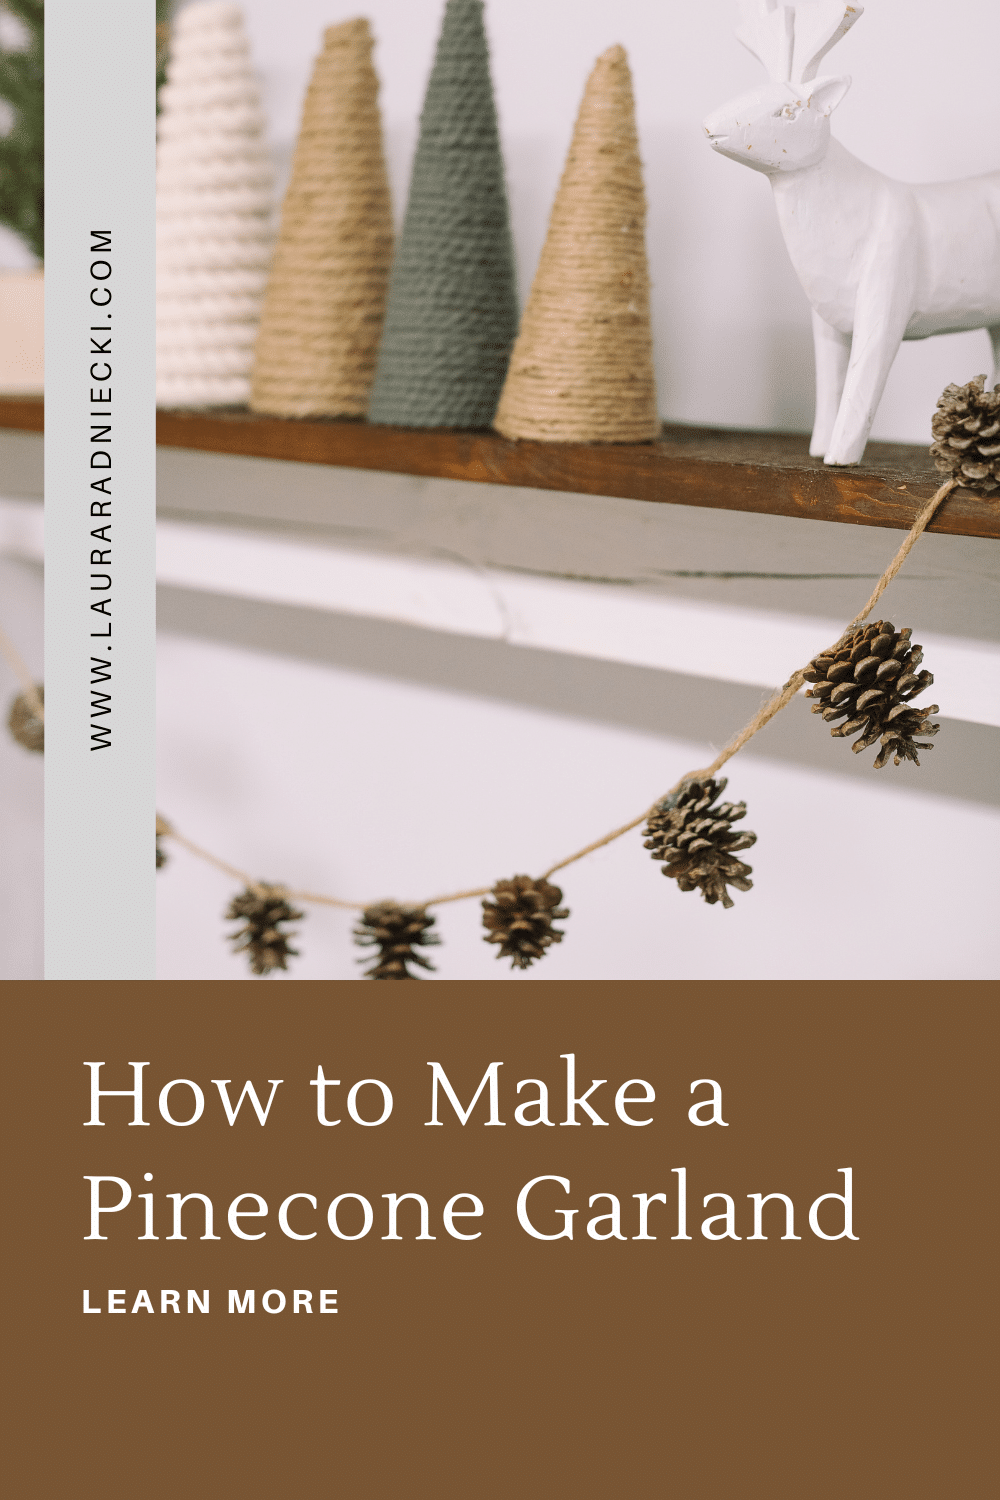 How to Make a Pinecone Garland for Christmas